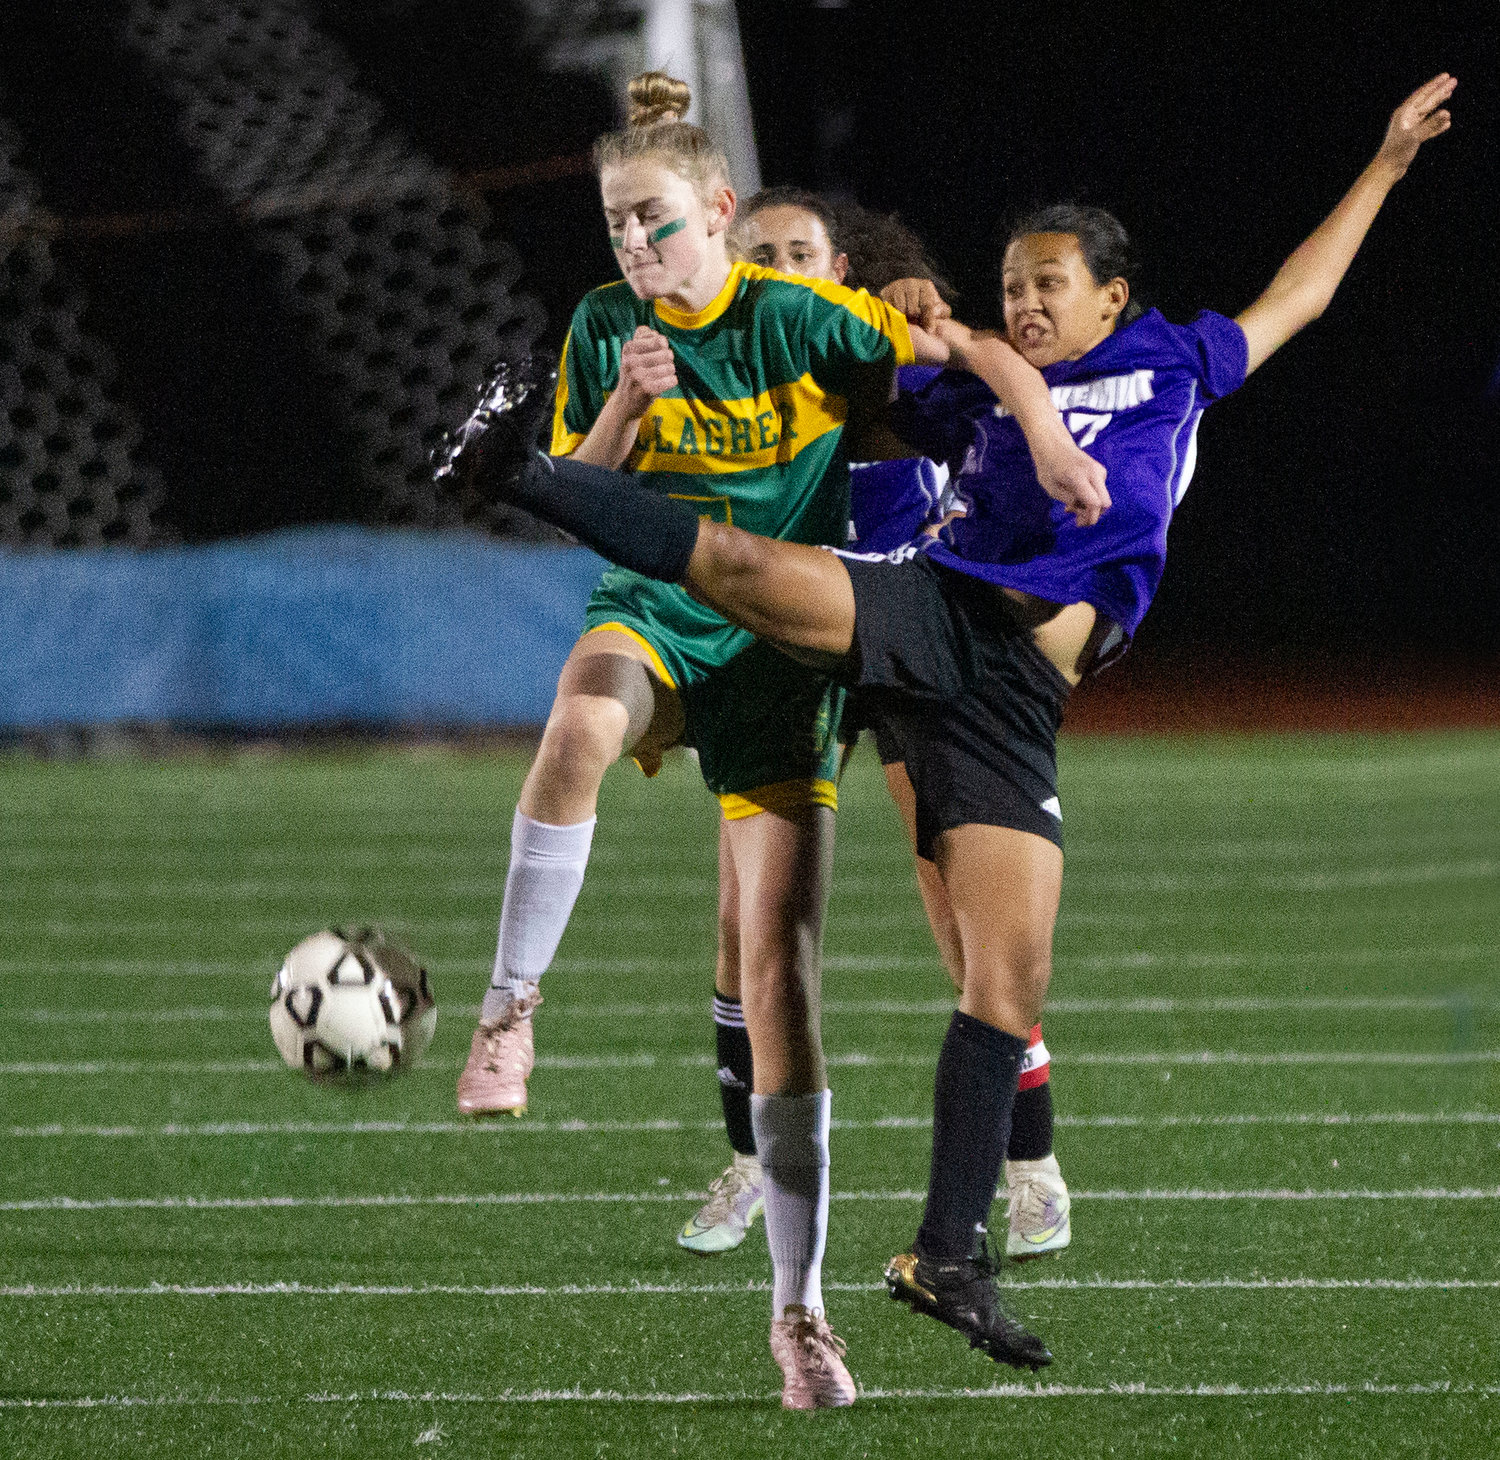 Maya Goglia is thrown to the ground by a Gallagher player while attempting to knock down a goal kick.